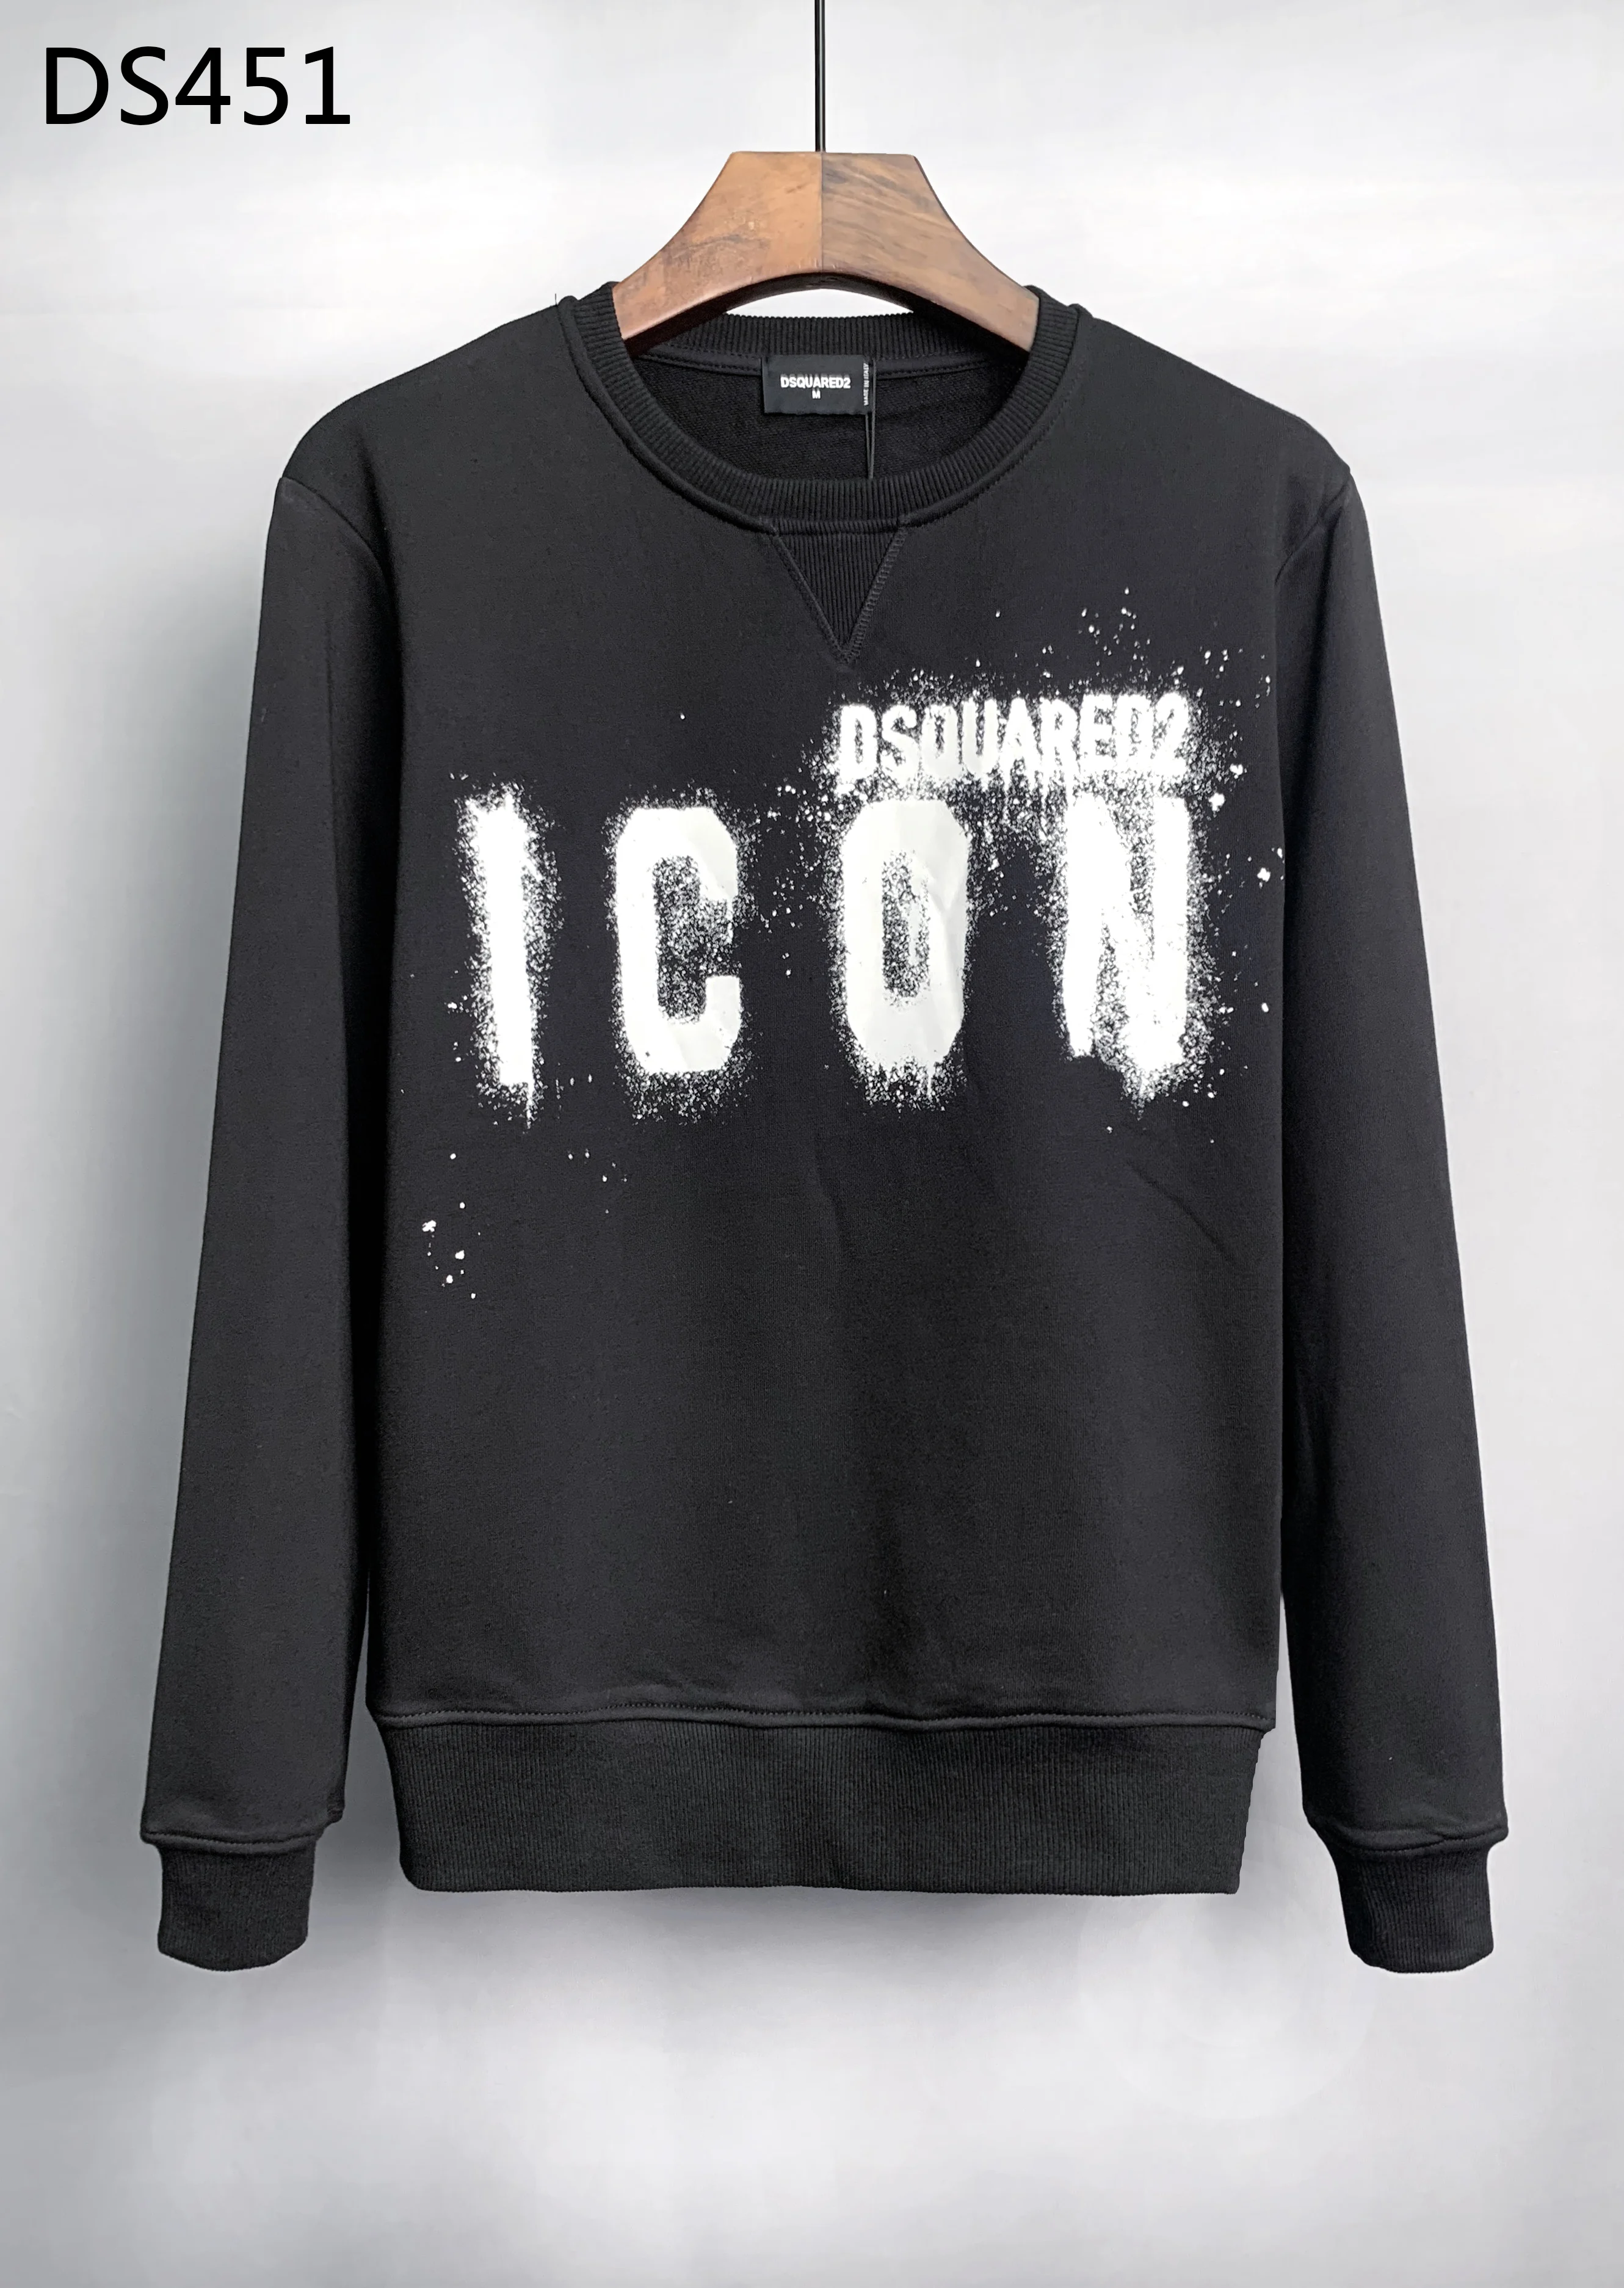 

2022 Men DSQUARED2 Brand Sweatshirt ICON Letter Print Shirts Simple Tops Male Italy Fashion Streetwear Black Cool Pullover Tops